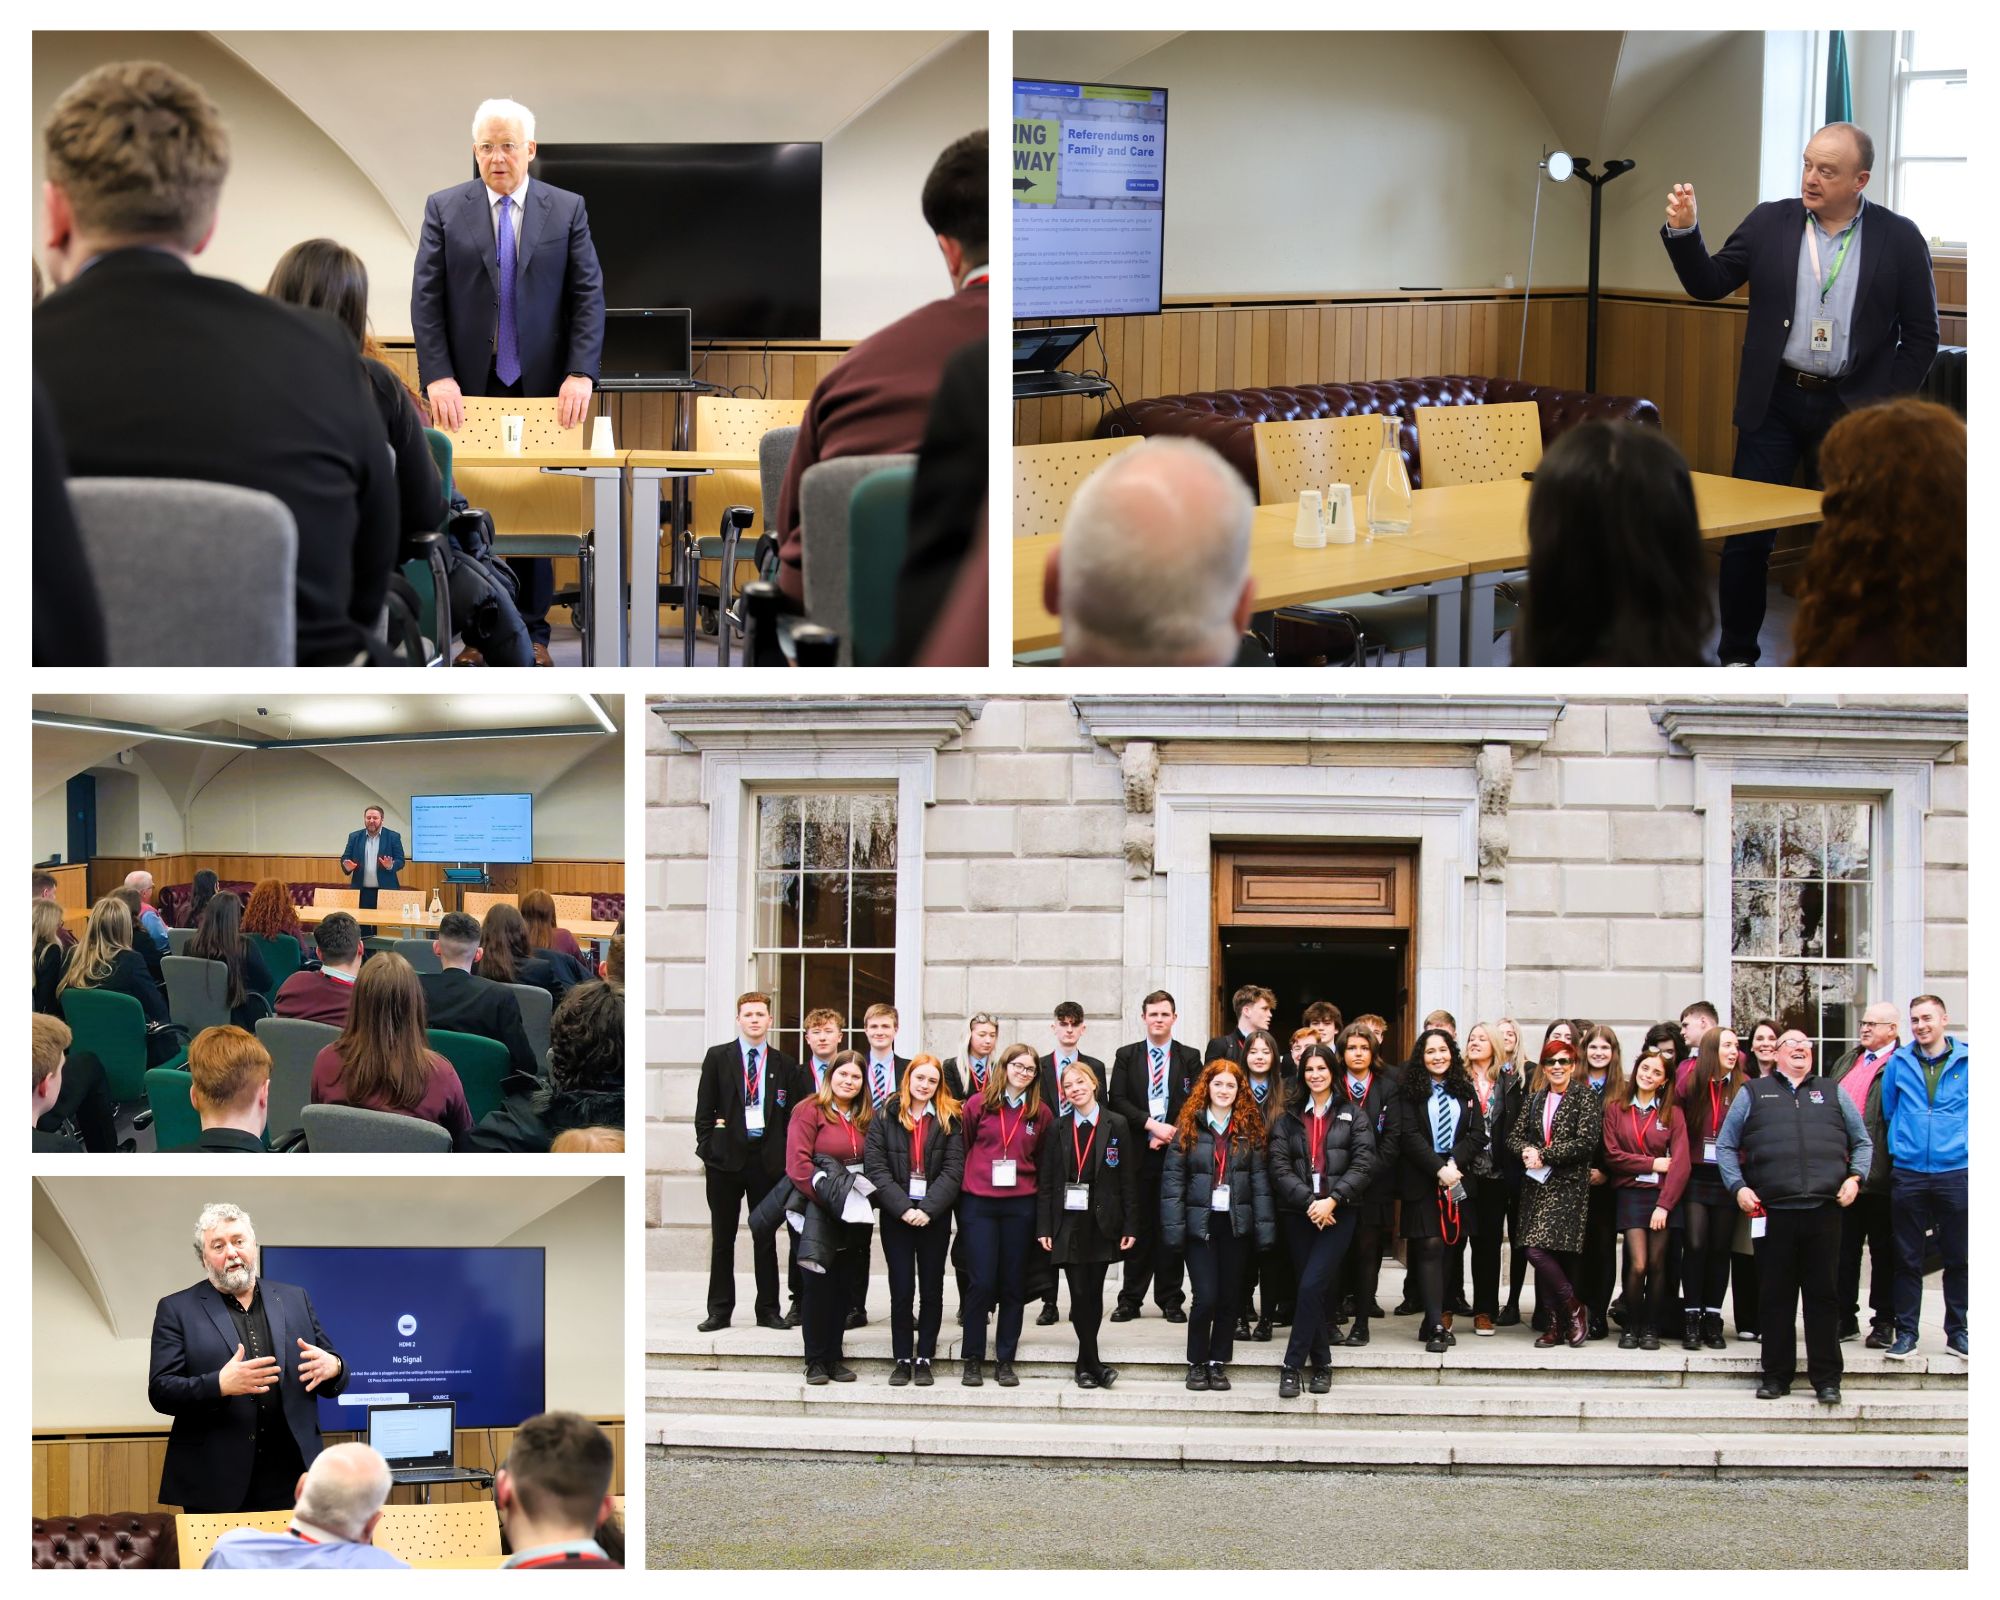 The Politics in Action student group attending the education workshop during their visit to Leinster House